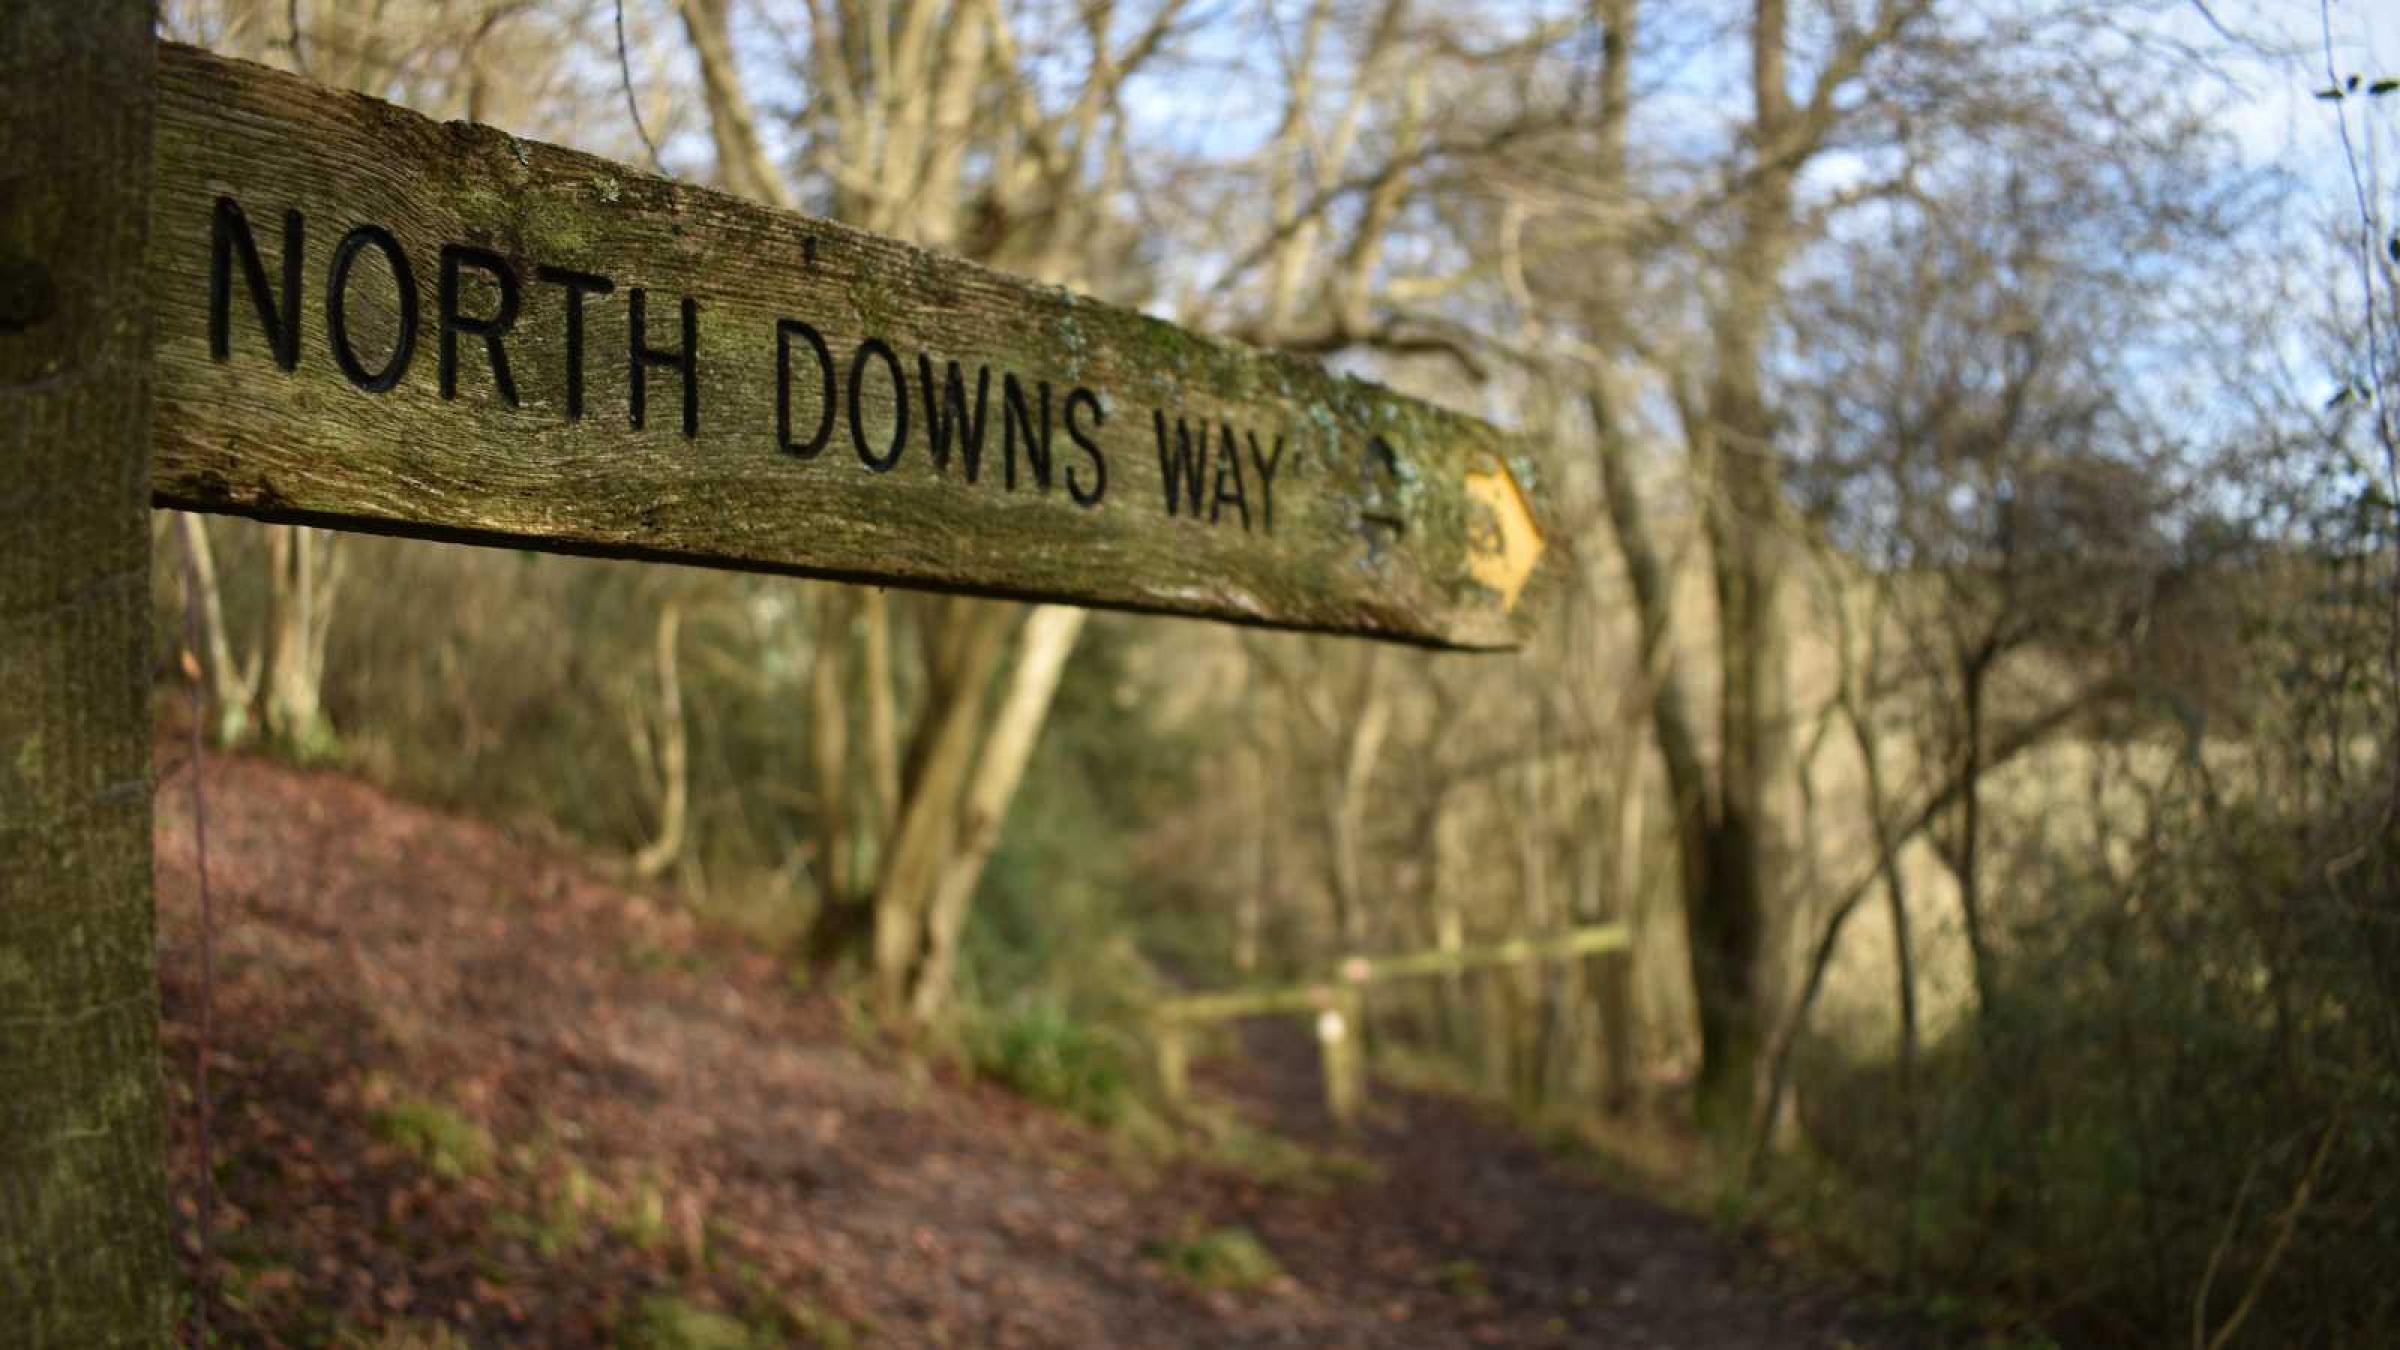 A North Downs Way sign in the woods